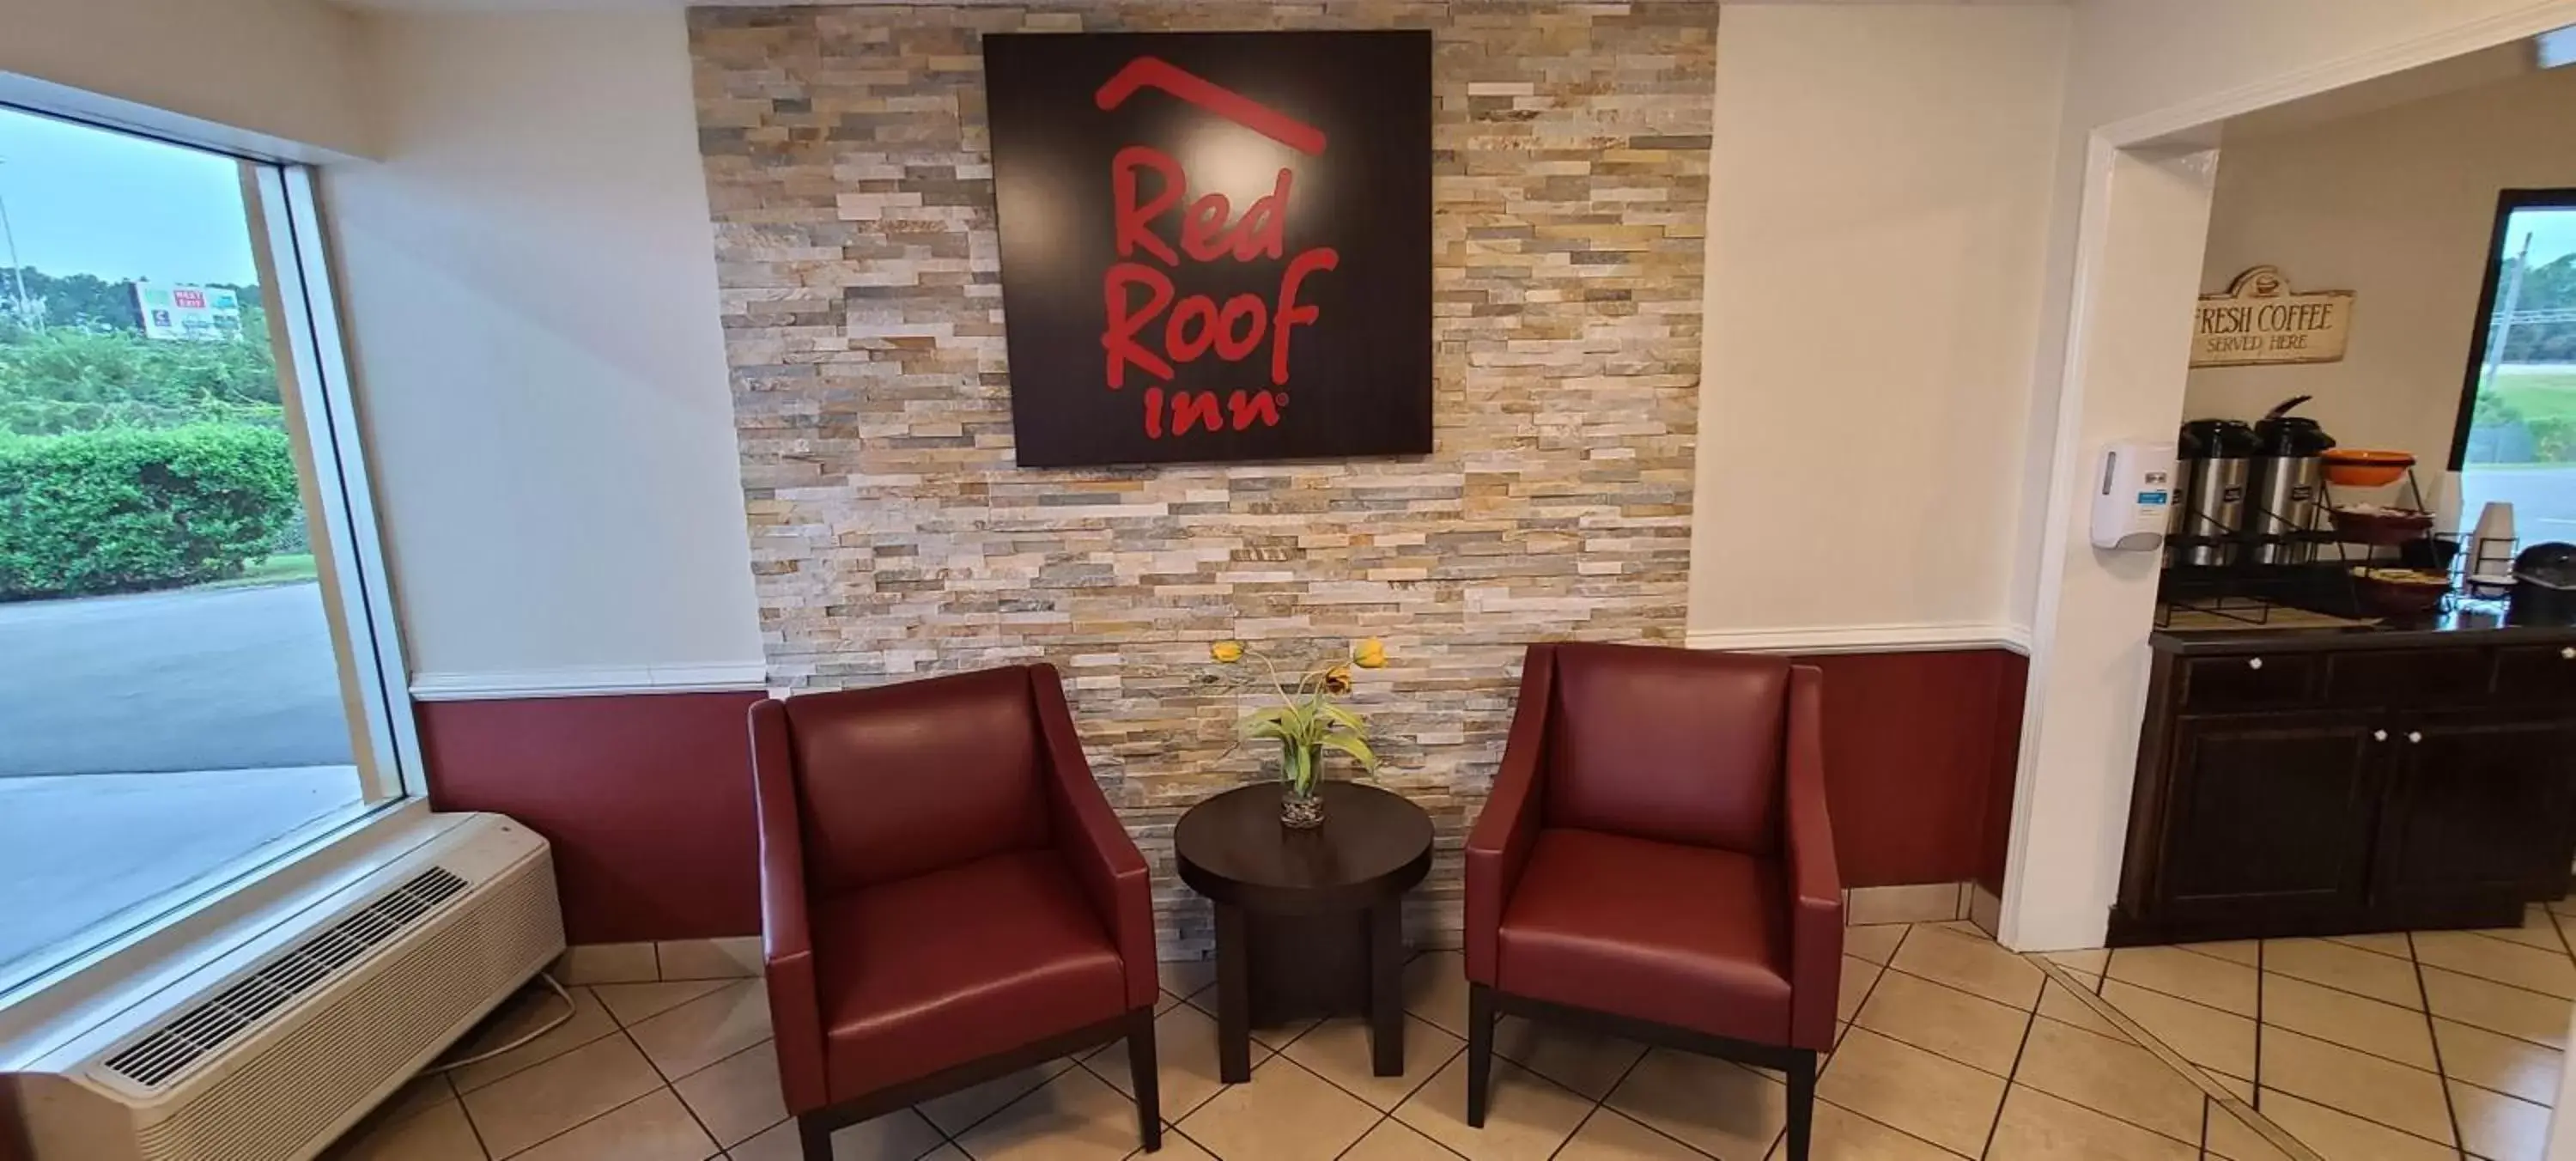 Lobby or reception, Seating Area in Red Roof Inn Tifton